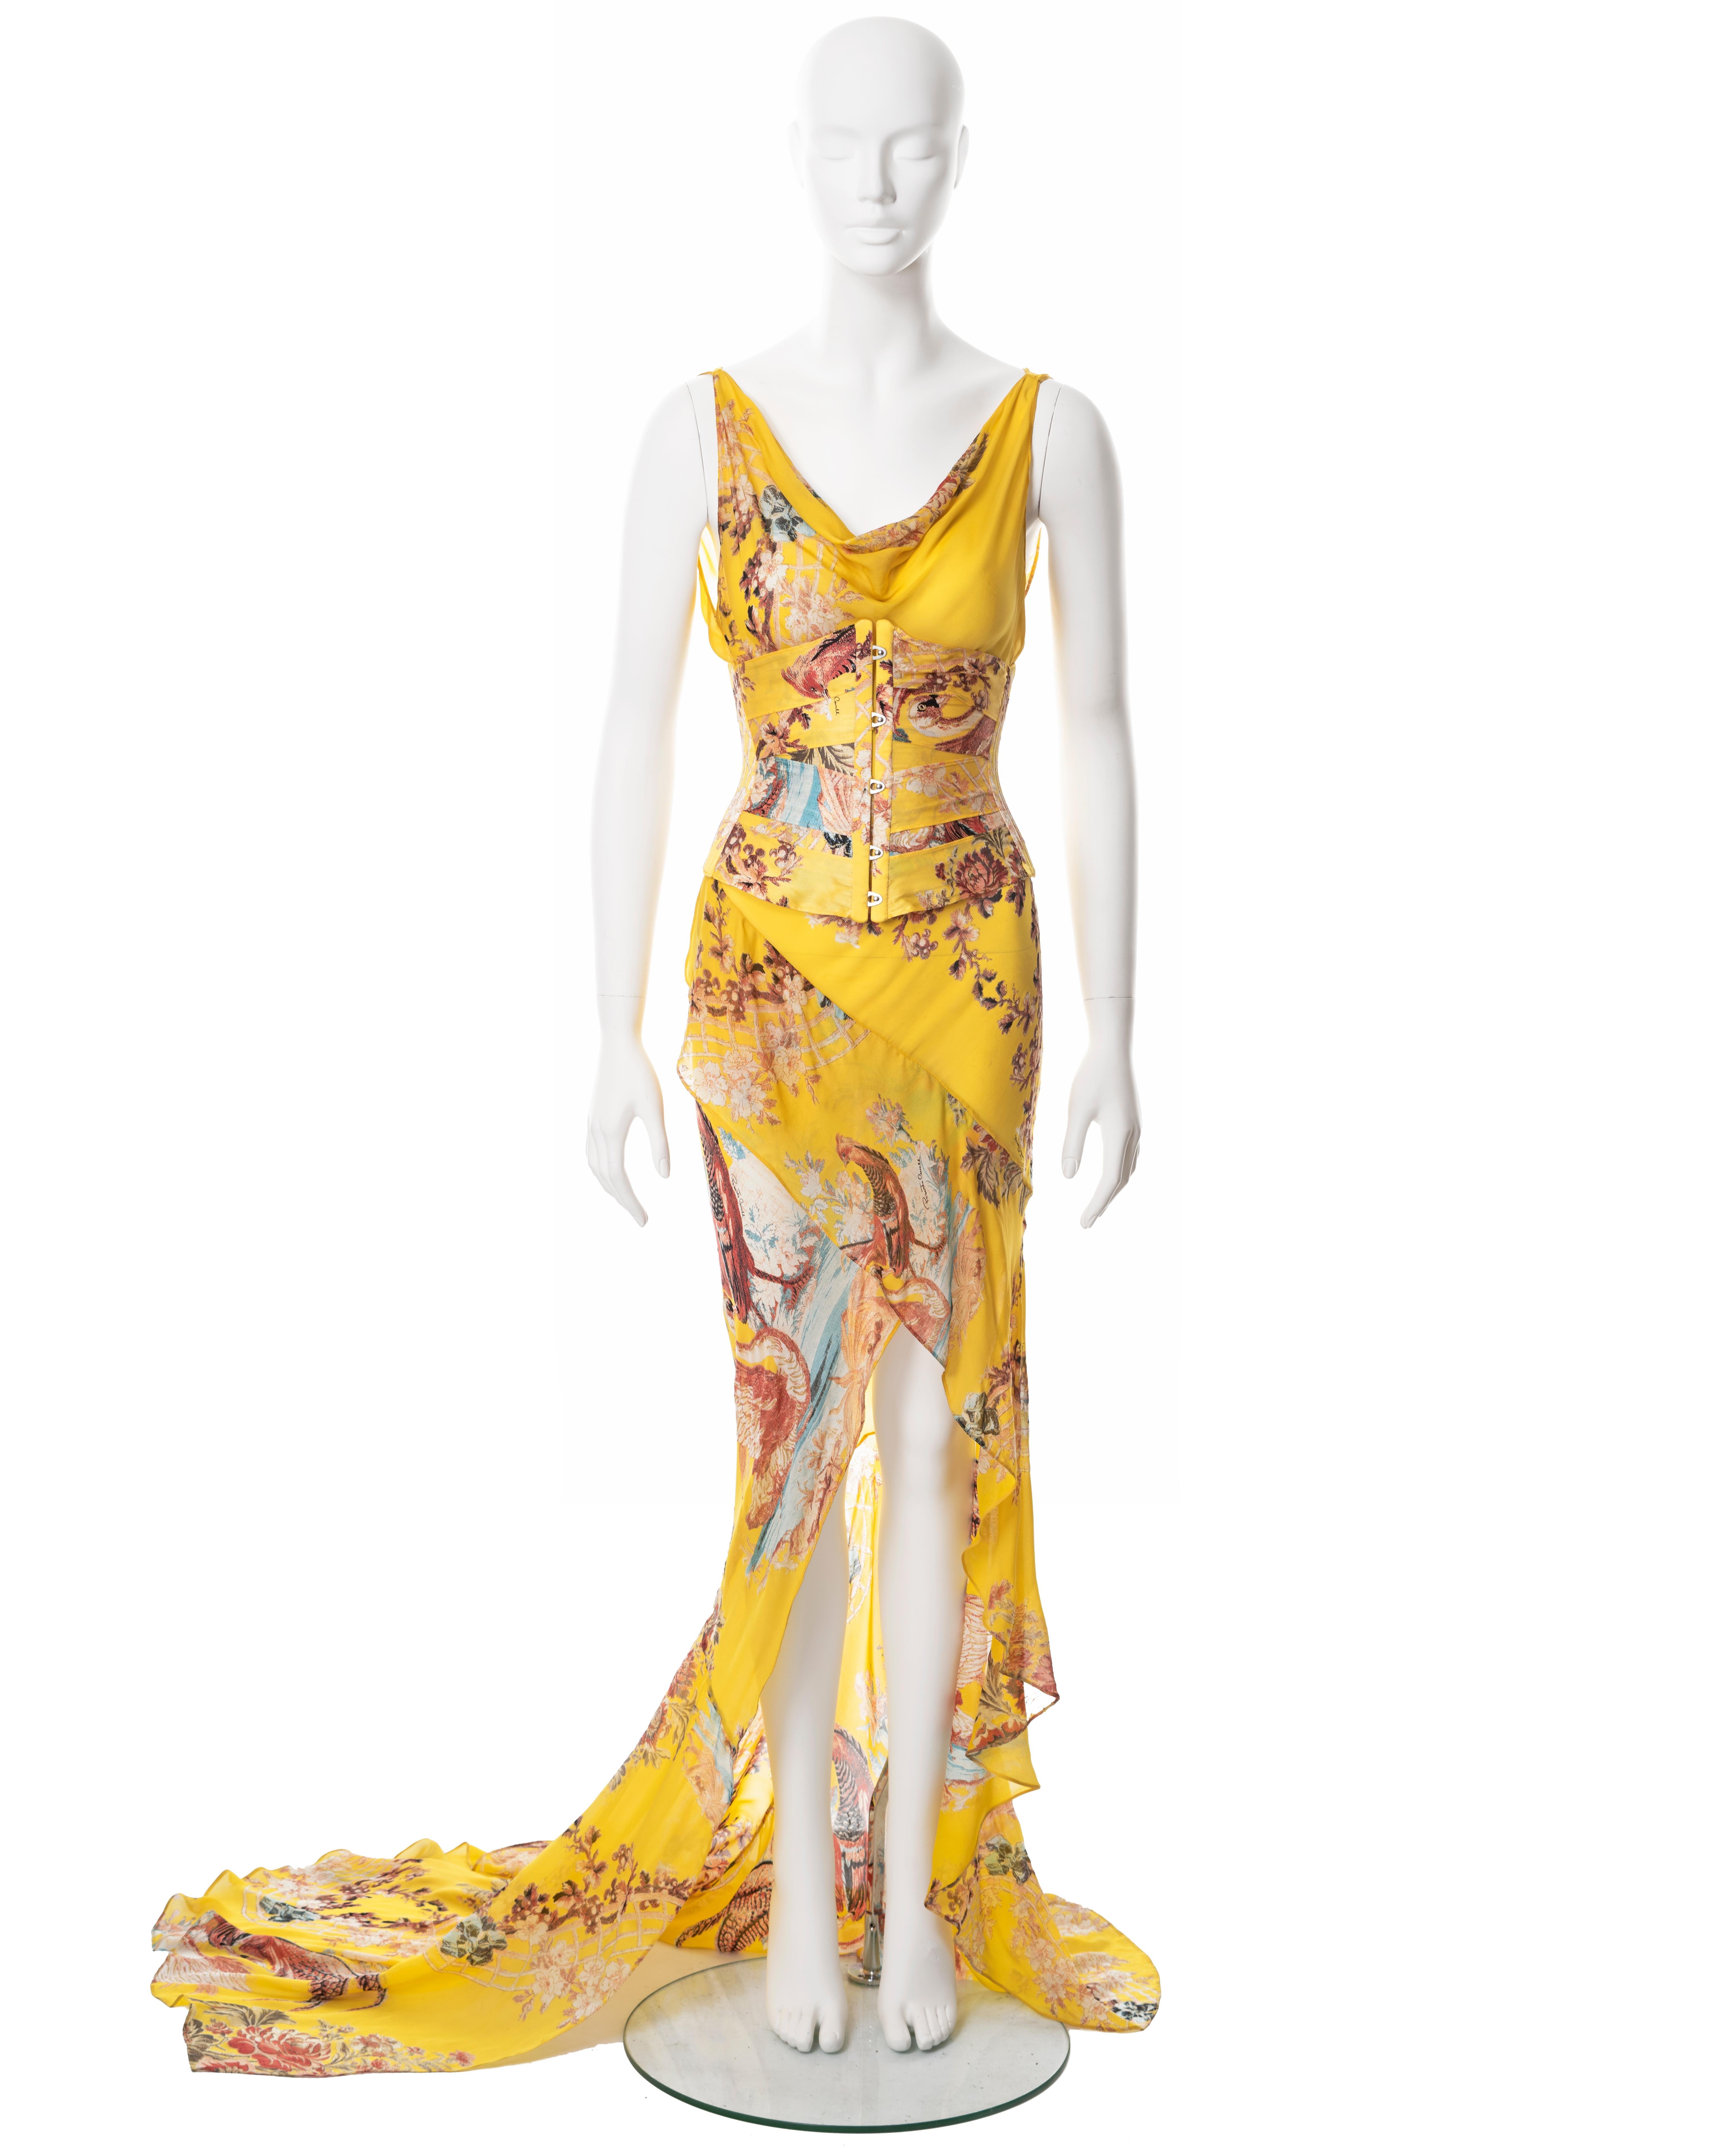 ▪ Roberto Cavalli evening dress and corset 
▪ Sold by One of a Kind Archive
▪ Spring-Summer 2003
▪ Constructed from yellow bias-cut silk with pink and blue floral print 
▪ Cowl neck
▪ High-low floor length skirt with train 
▪ Sold with matching